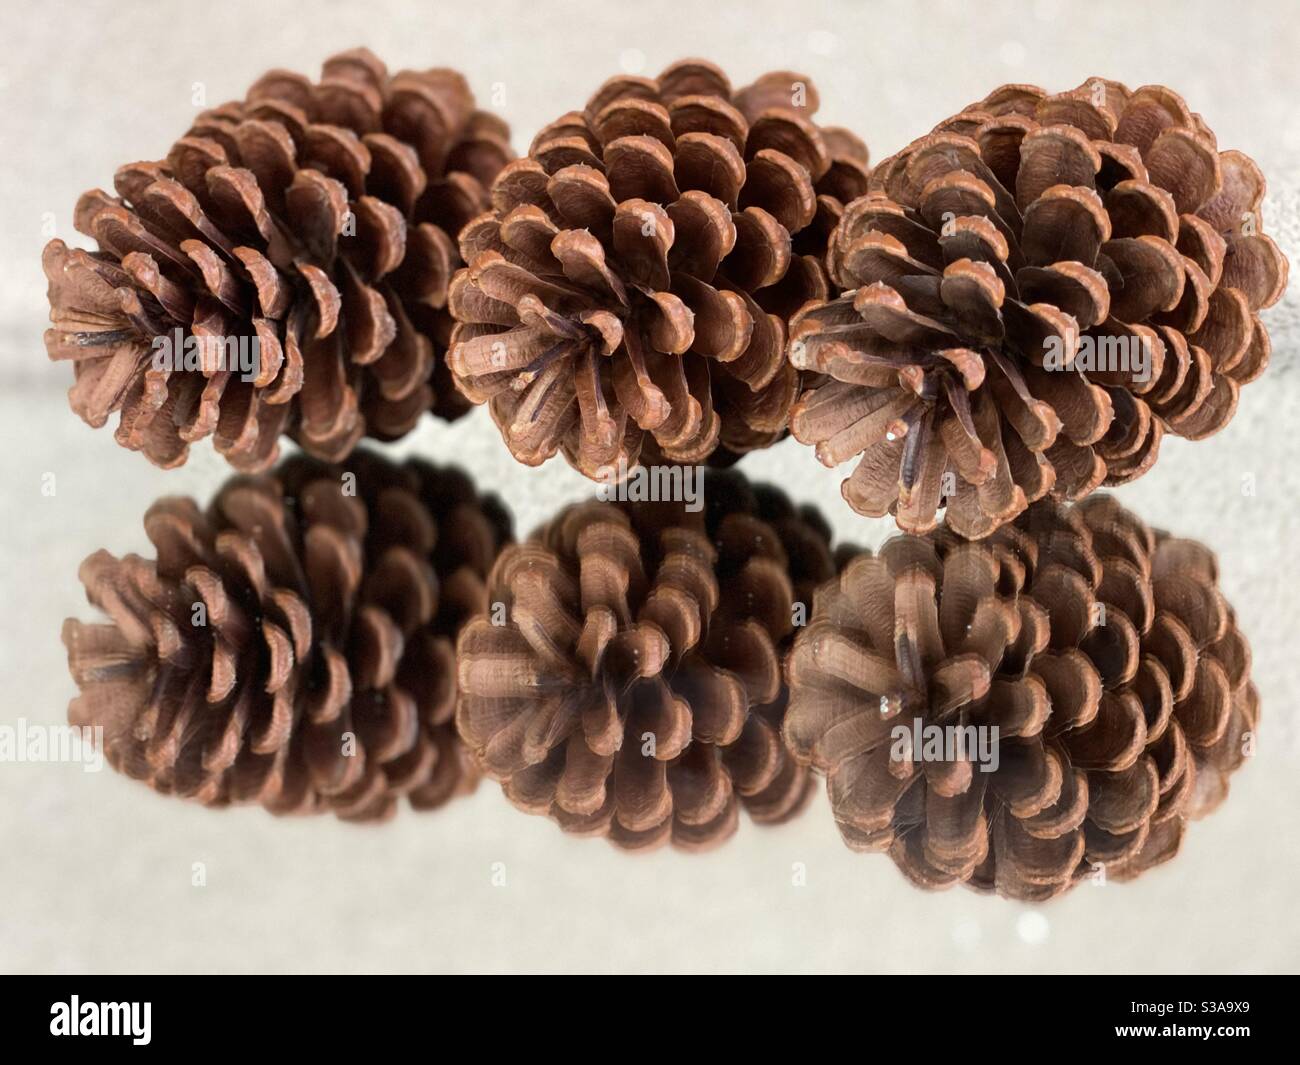 Still life of pine cones on a mirrored surface Stock Photo